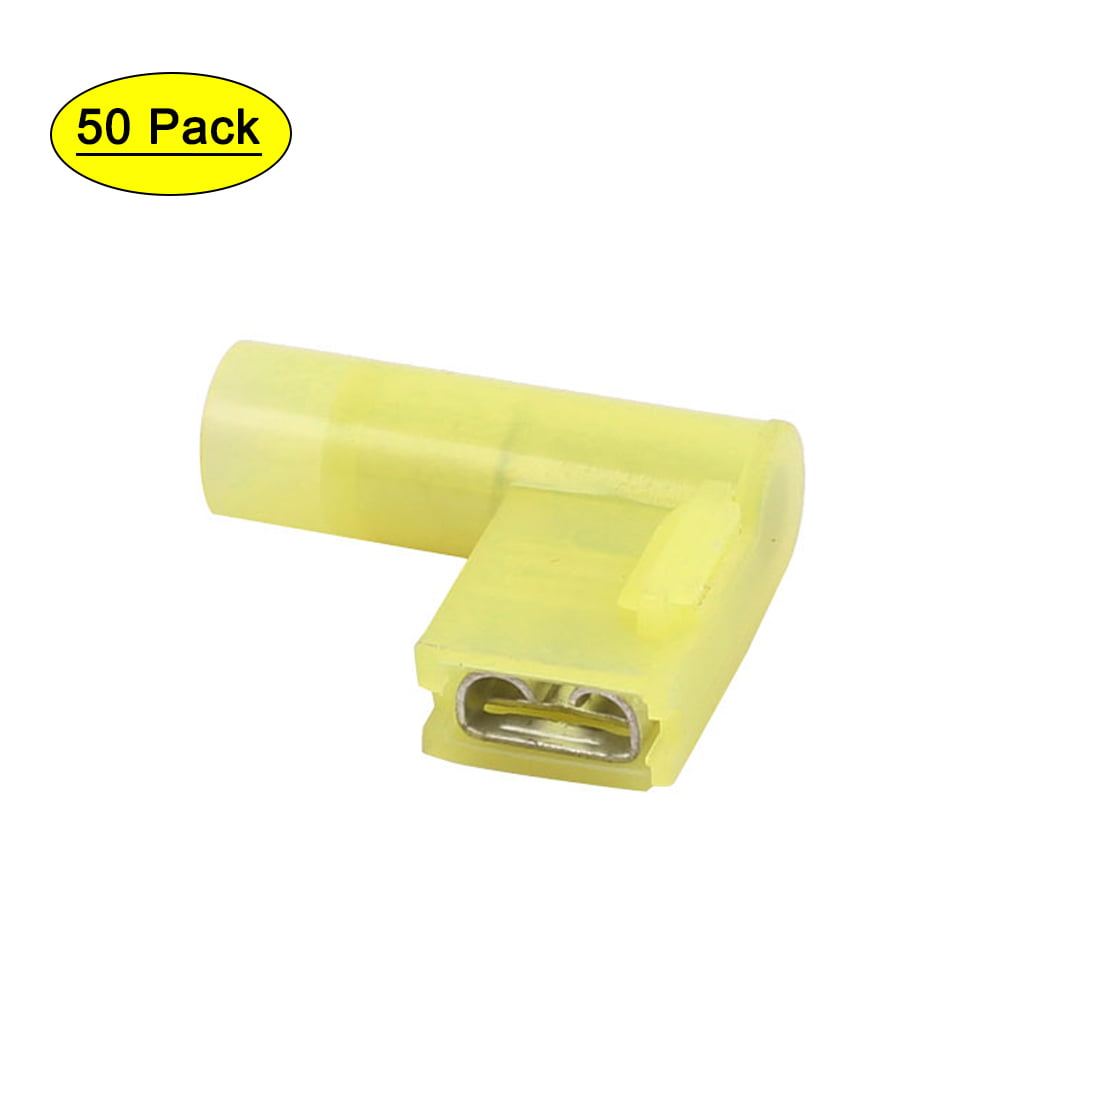 50 pcs YELLOW 12-10 AWG FLAG TERMINALS FEMALE WIRE CONNECTORS RIGHT ANGLE SPADE 